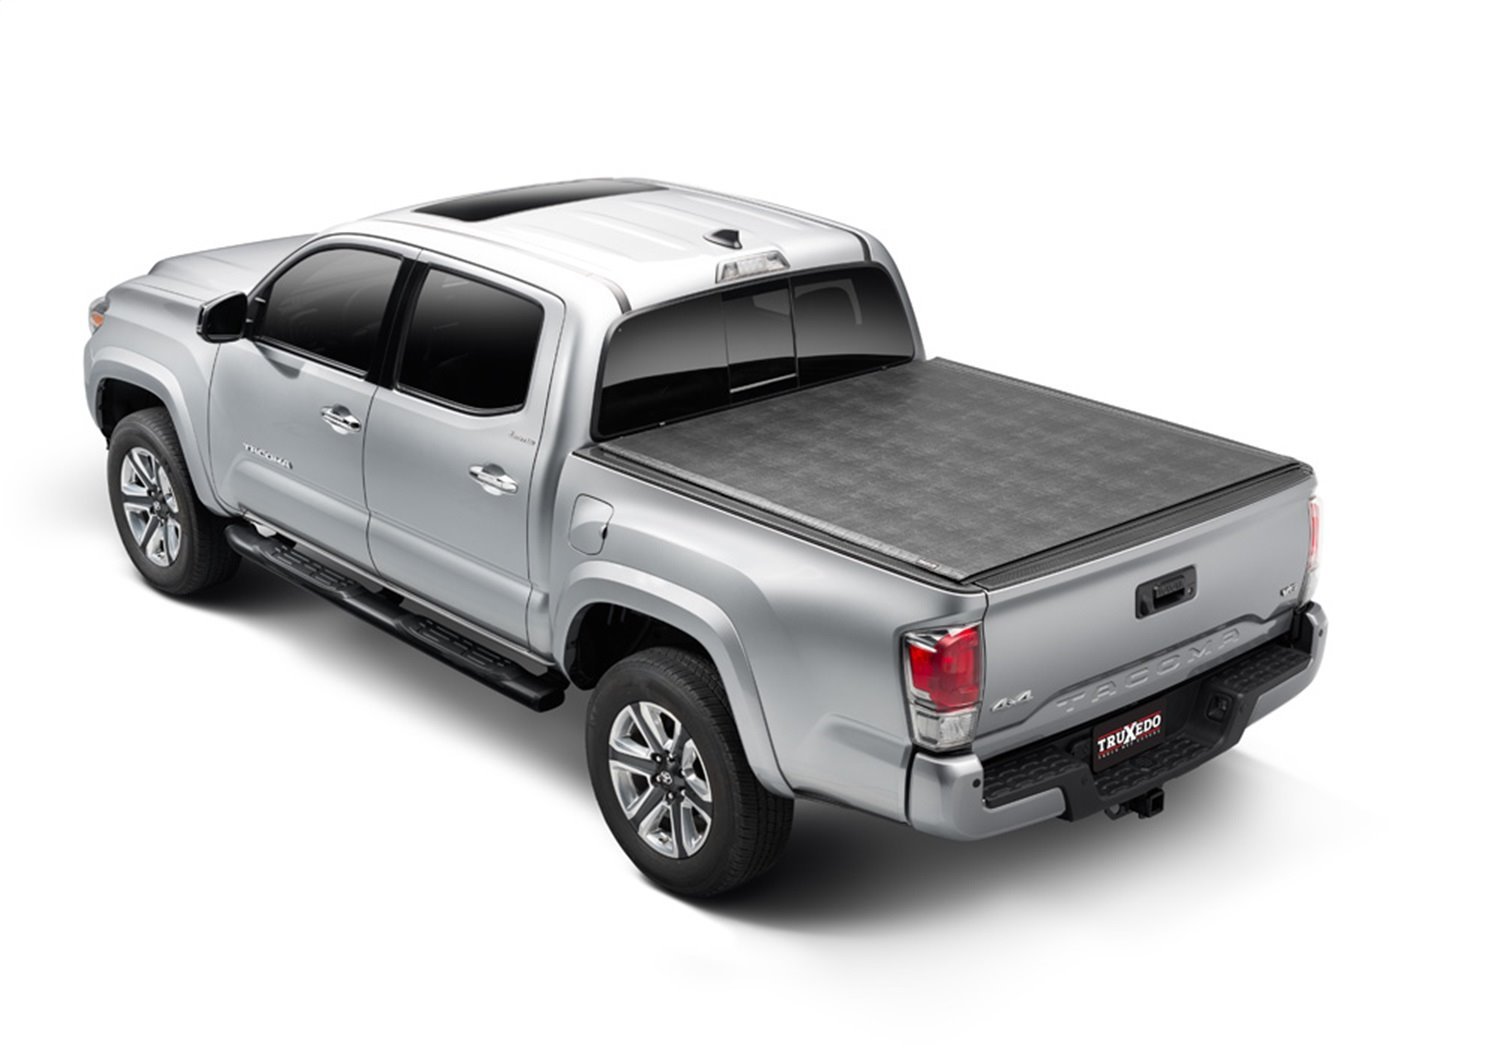 Sentry Roll-Up Tonneau Cover Fits Select Toyota Tundra,